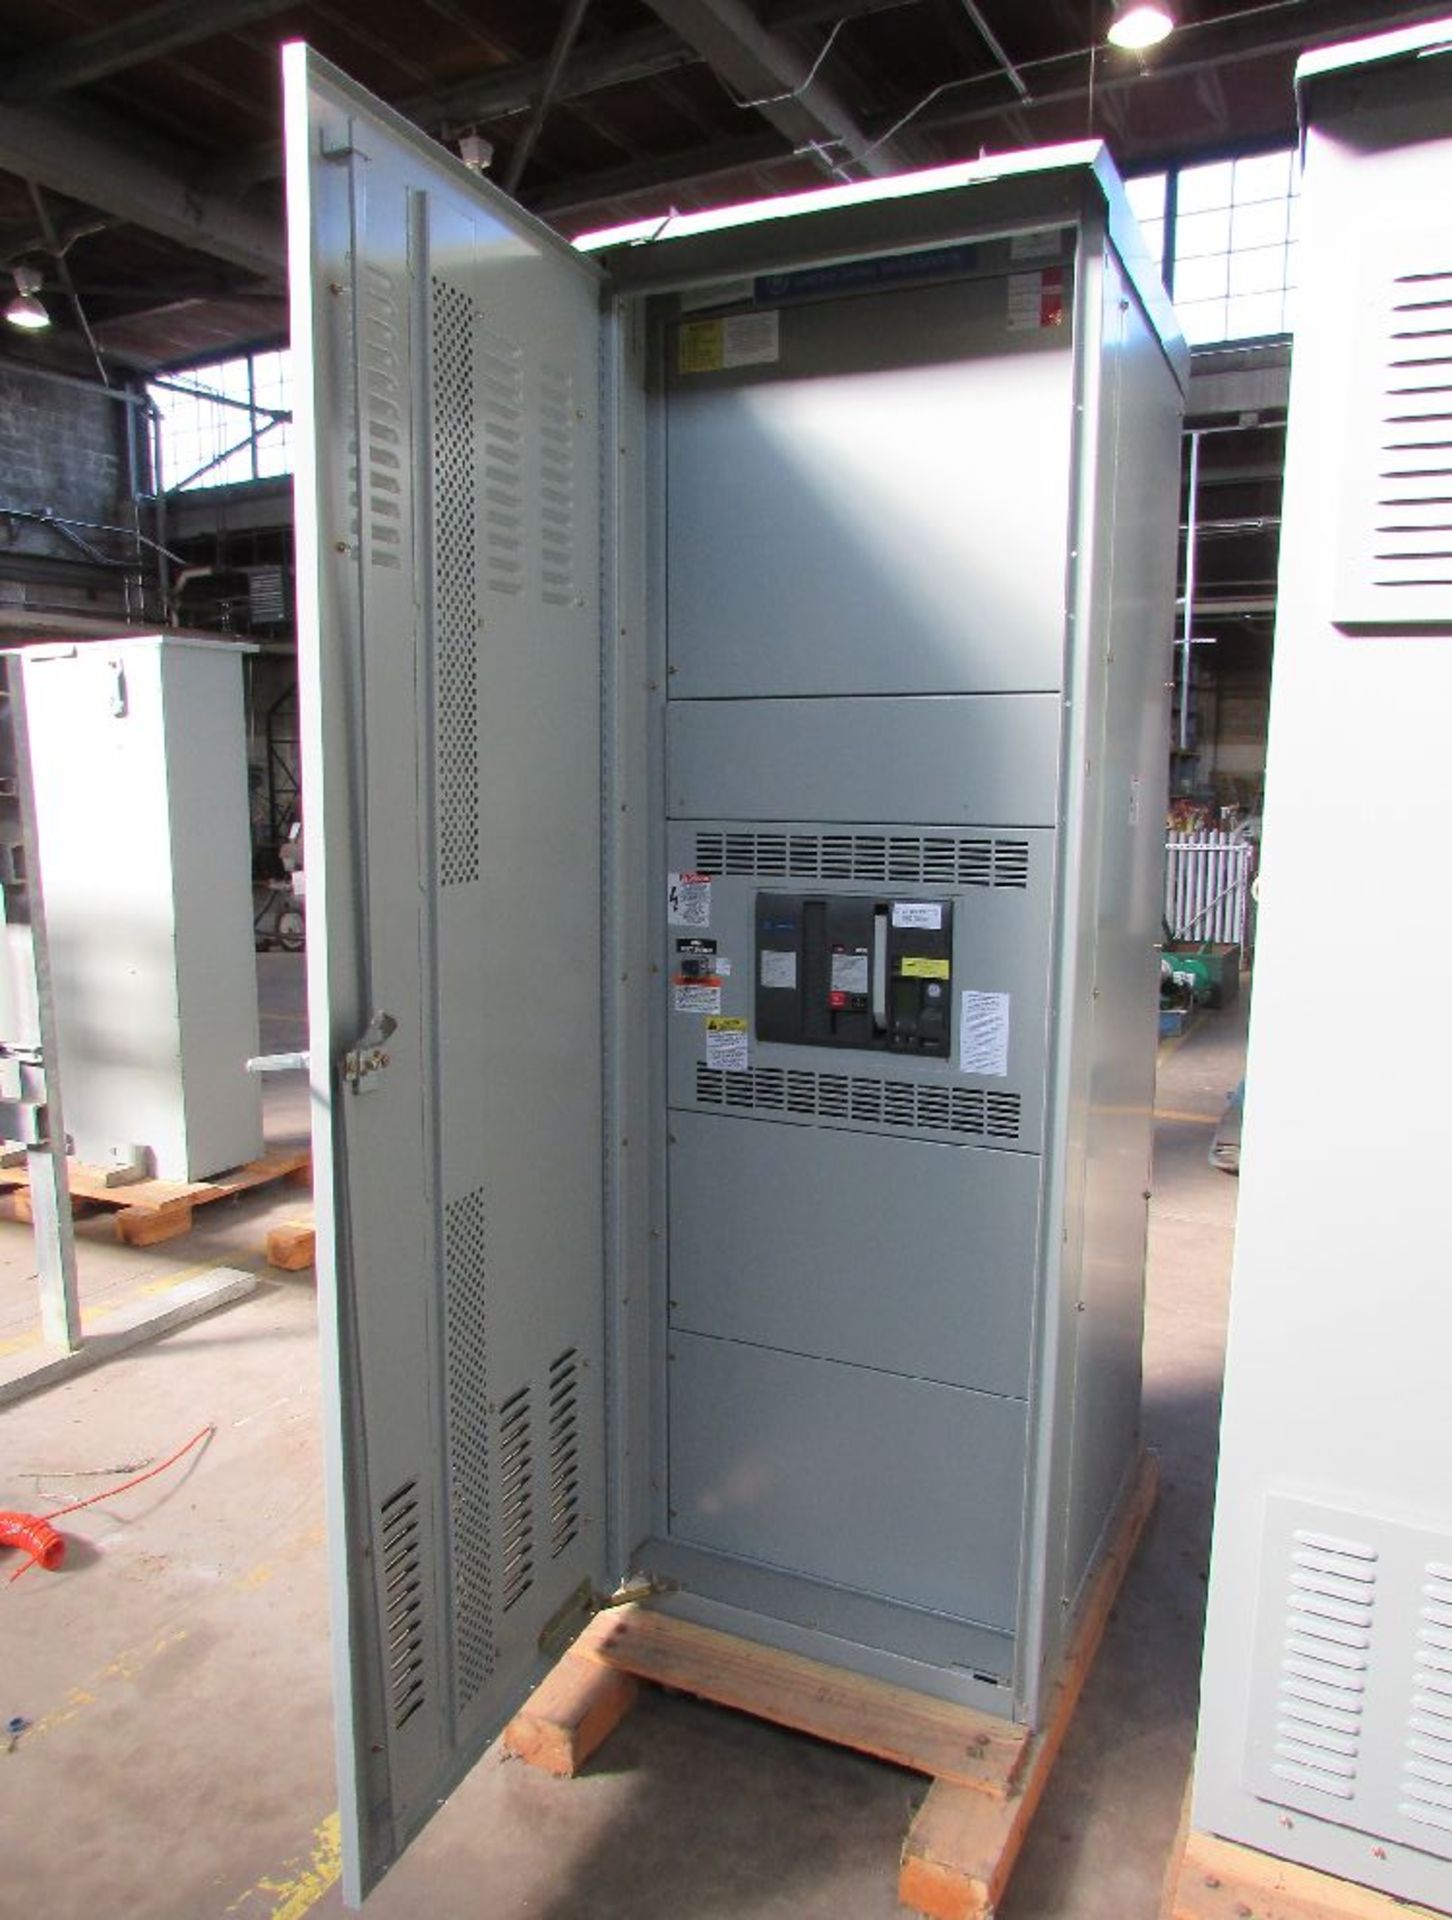 General Electric Model UAK14707SB Spectra Series Unused 1600A Electrical Switchboard - Image 2 of 5